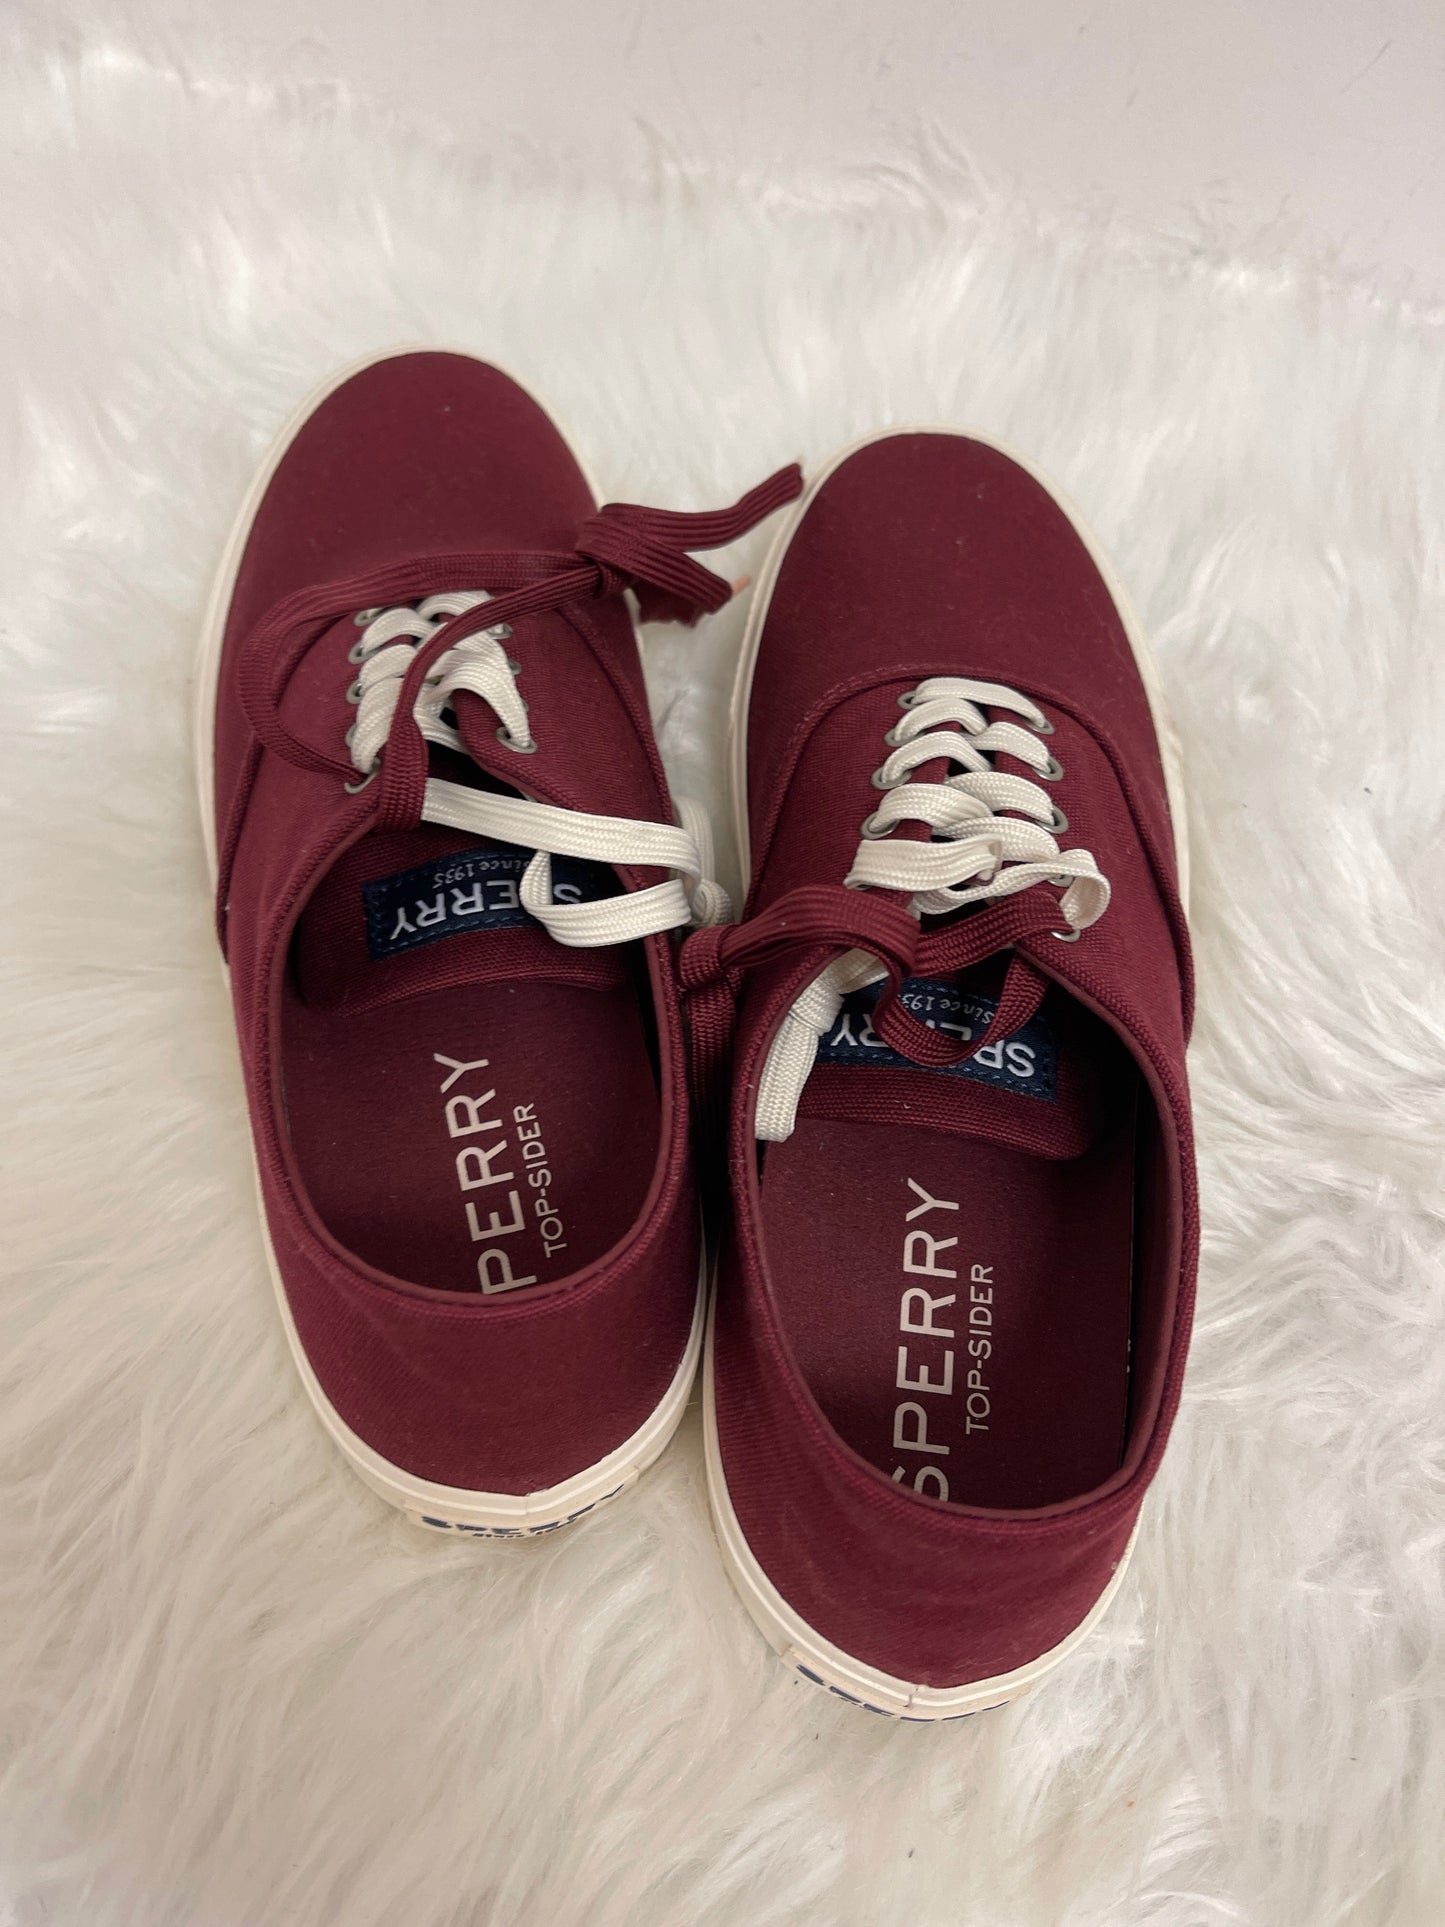 Red Shoes Sneakers Sperry, Size 8.5